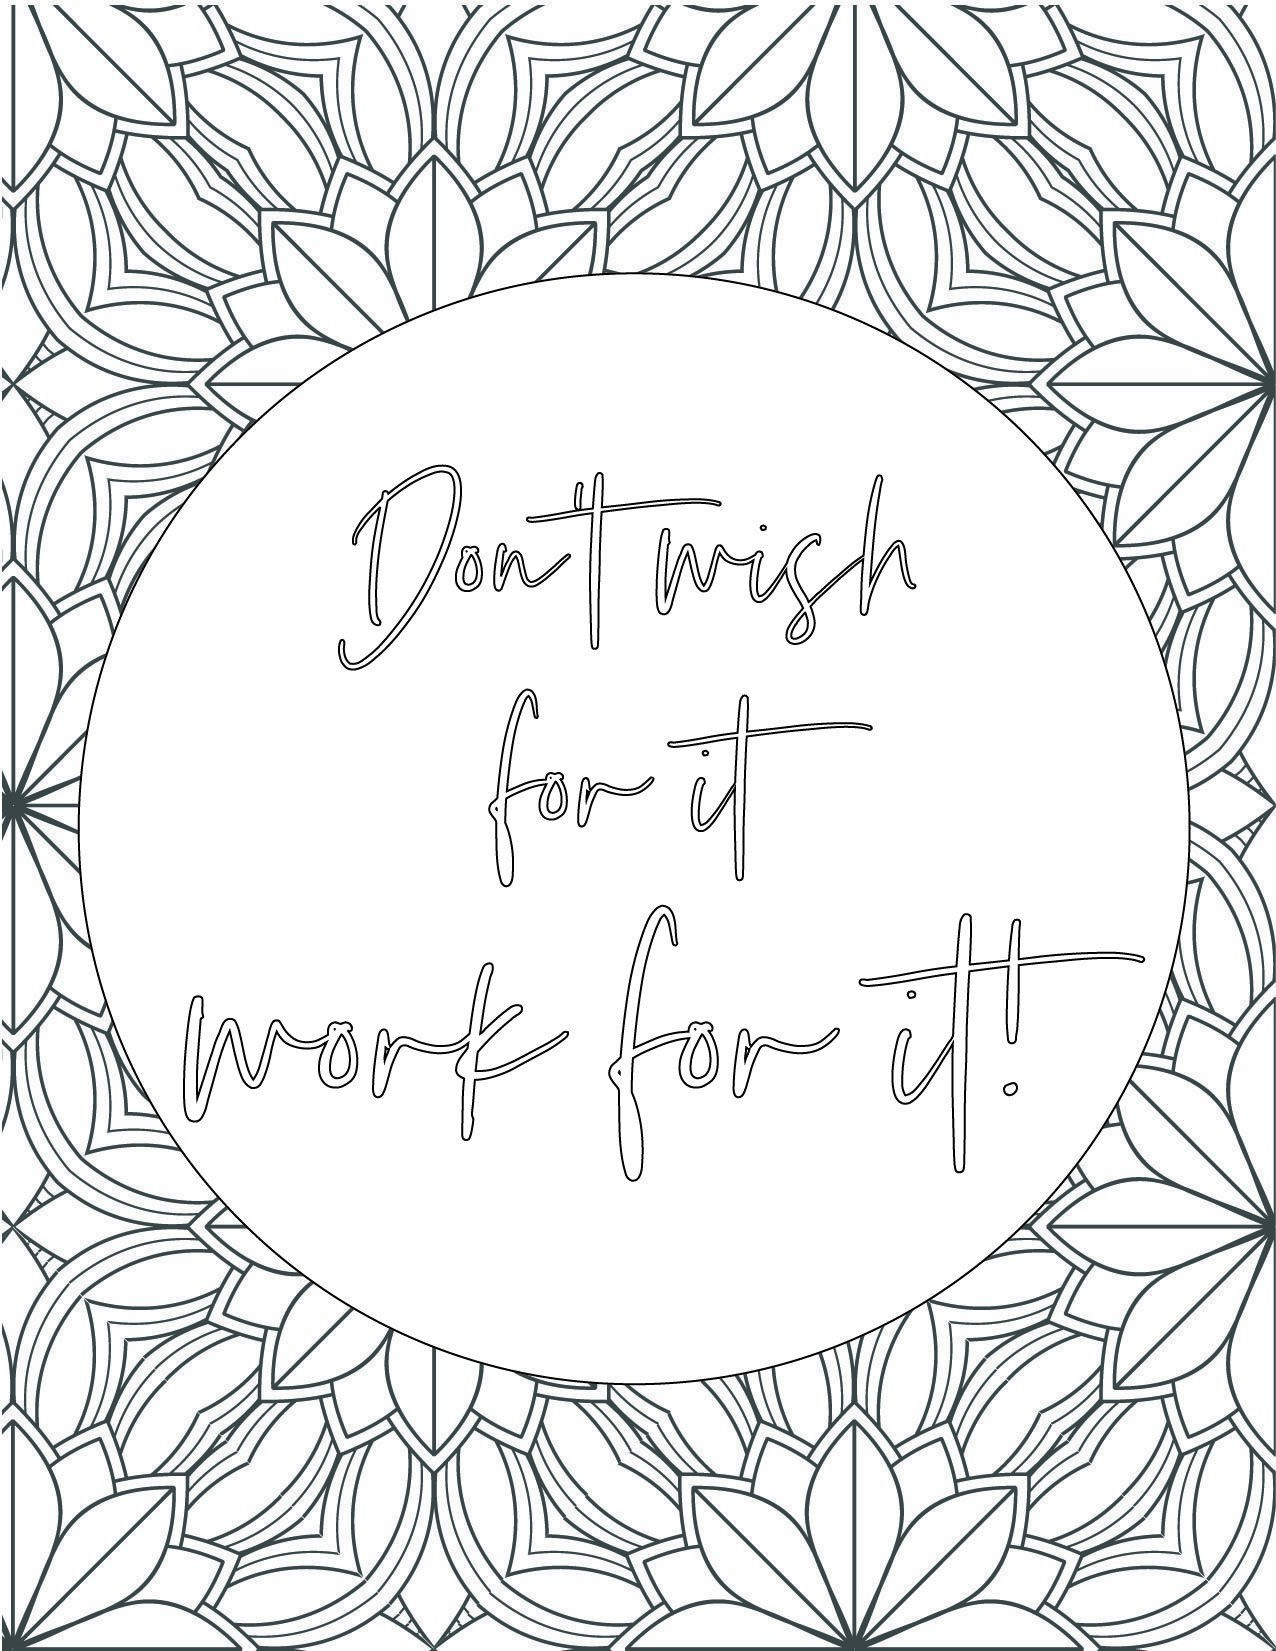 Best printable inspirational quote coloring pages